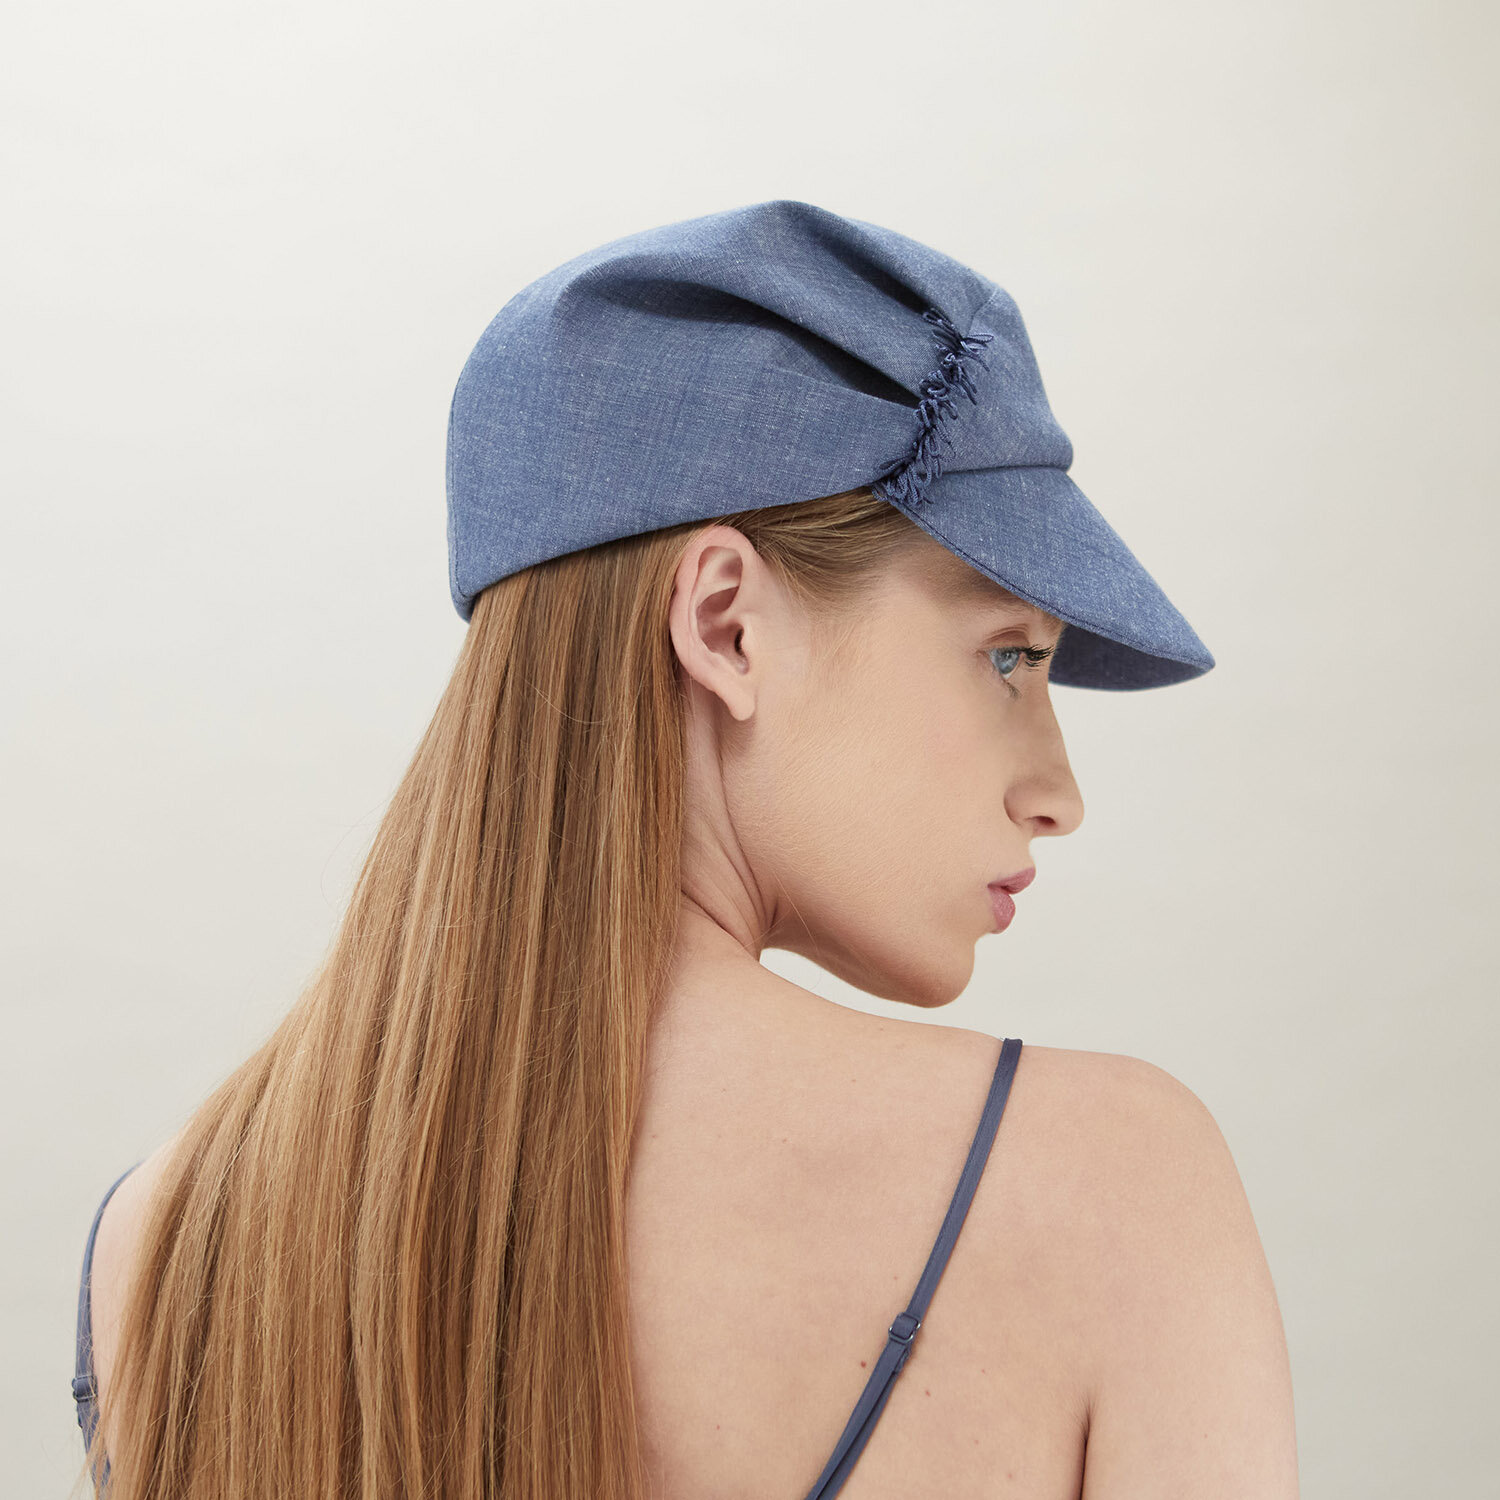   ‘Lee’ peaked cap in blue organic cotton.   Photo by James Champion 